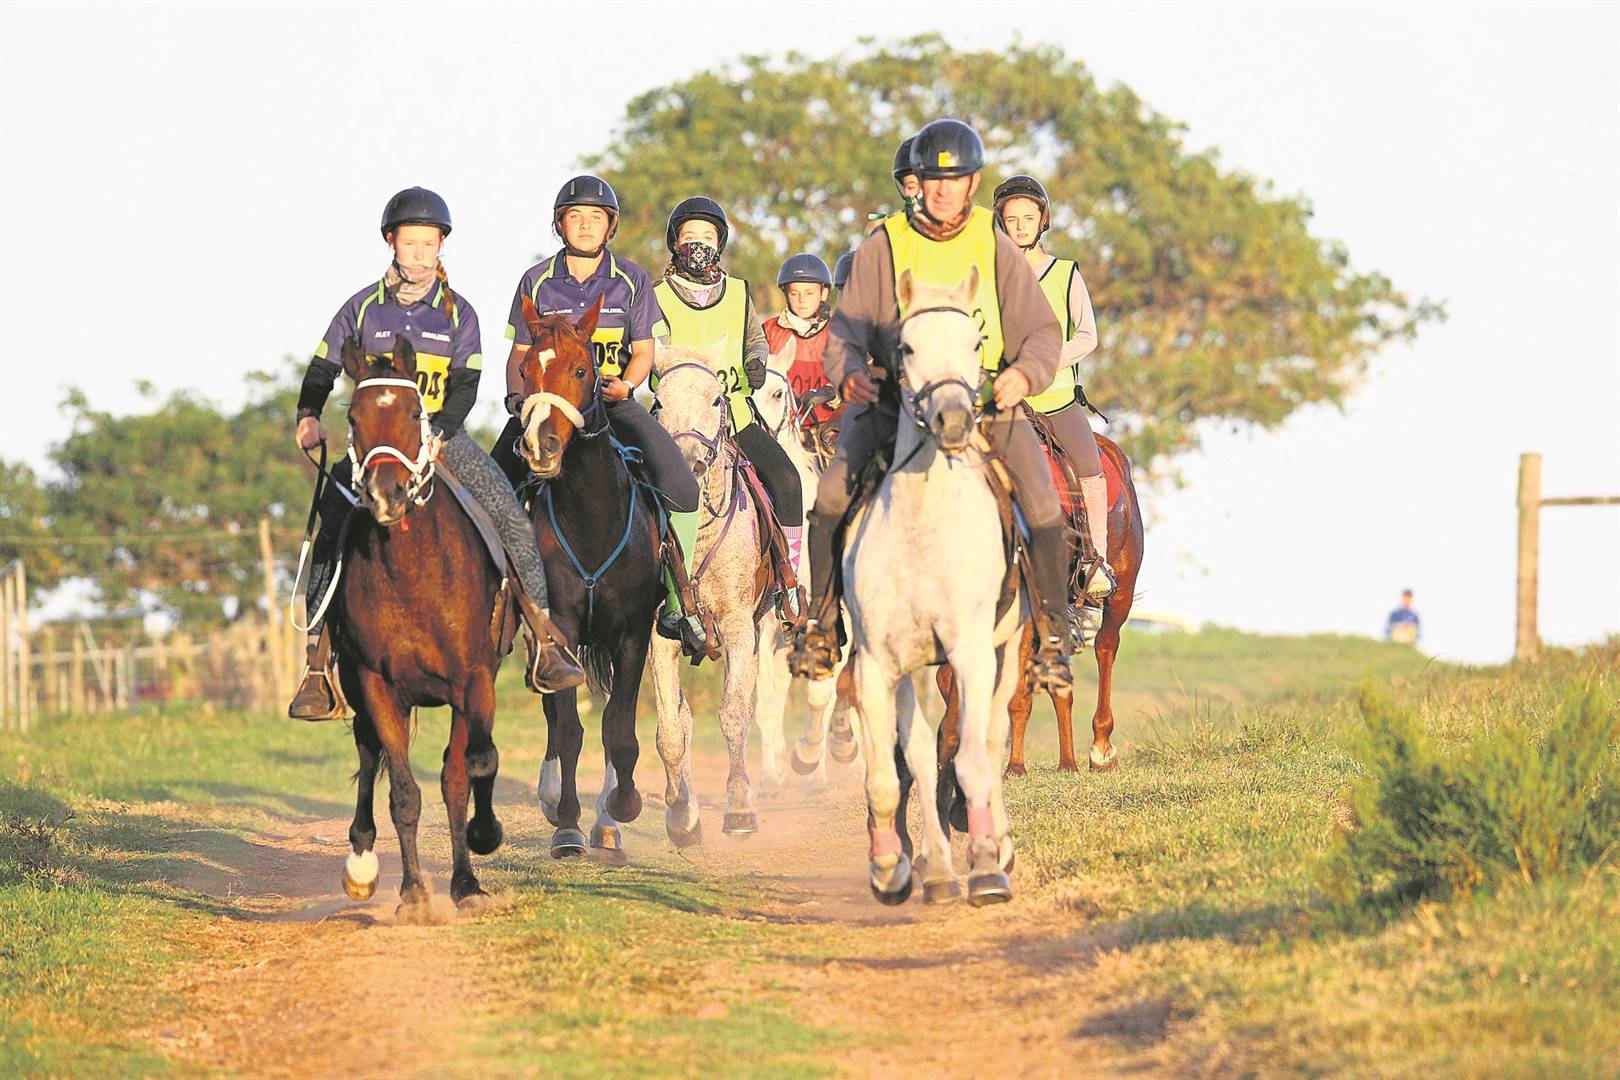 The Smaldeel Endurance Club brought 13 horses to compete in the 40km and 80km challenge at the Emerald Valley Endurance Ride. Photo: SUPPLIED